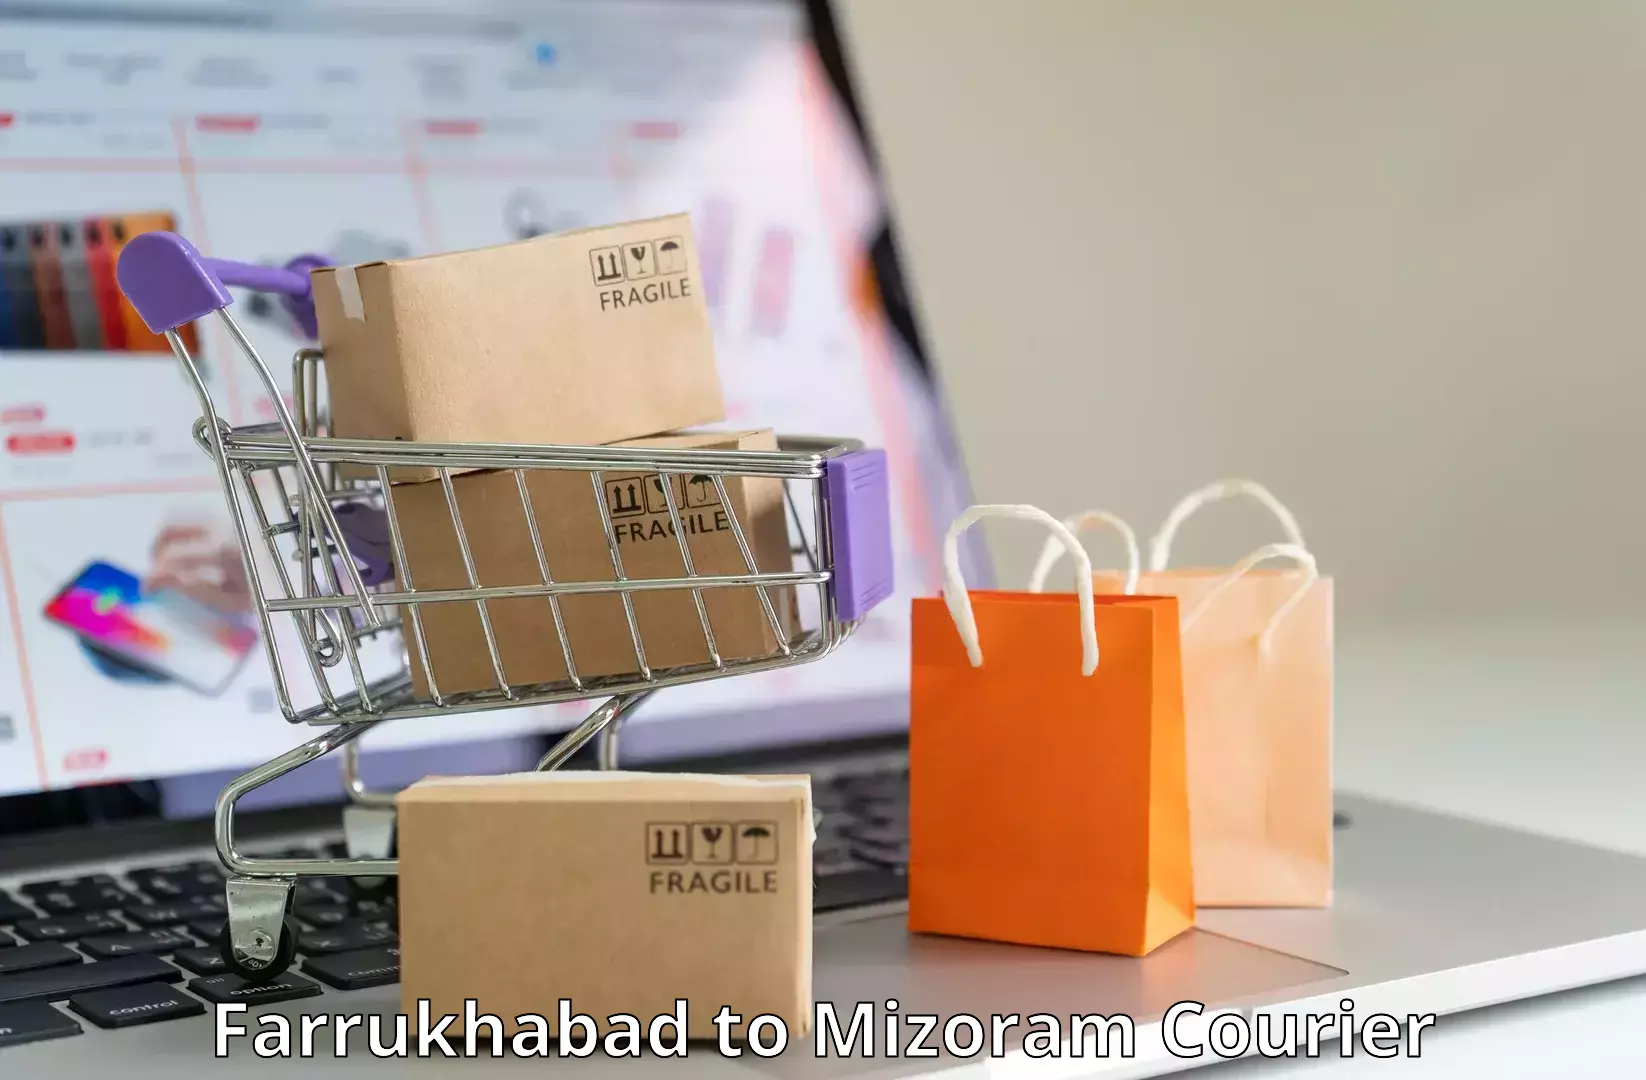 Large package courier Farrukhabad to Mizoram